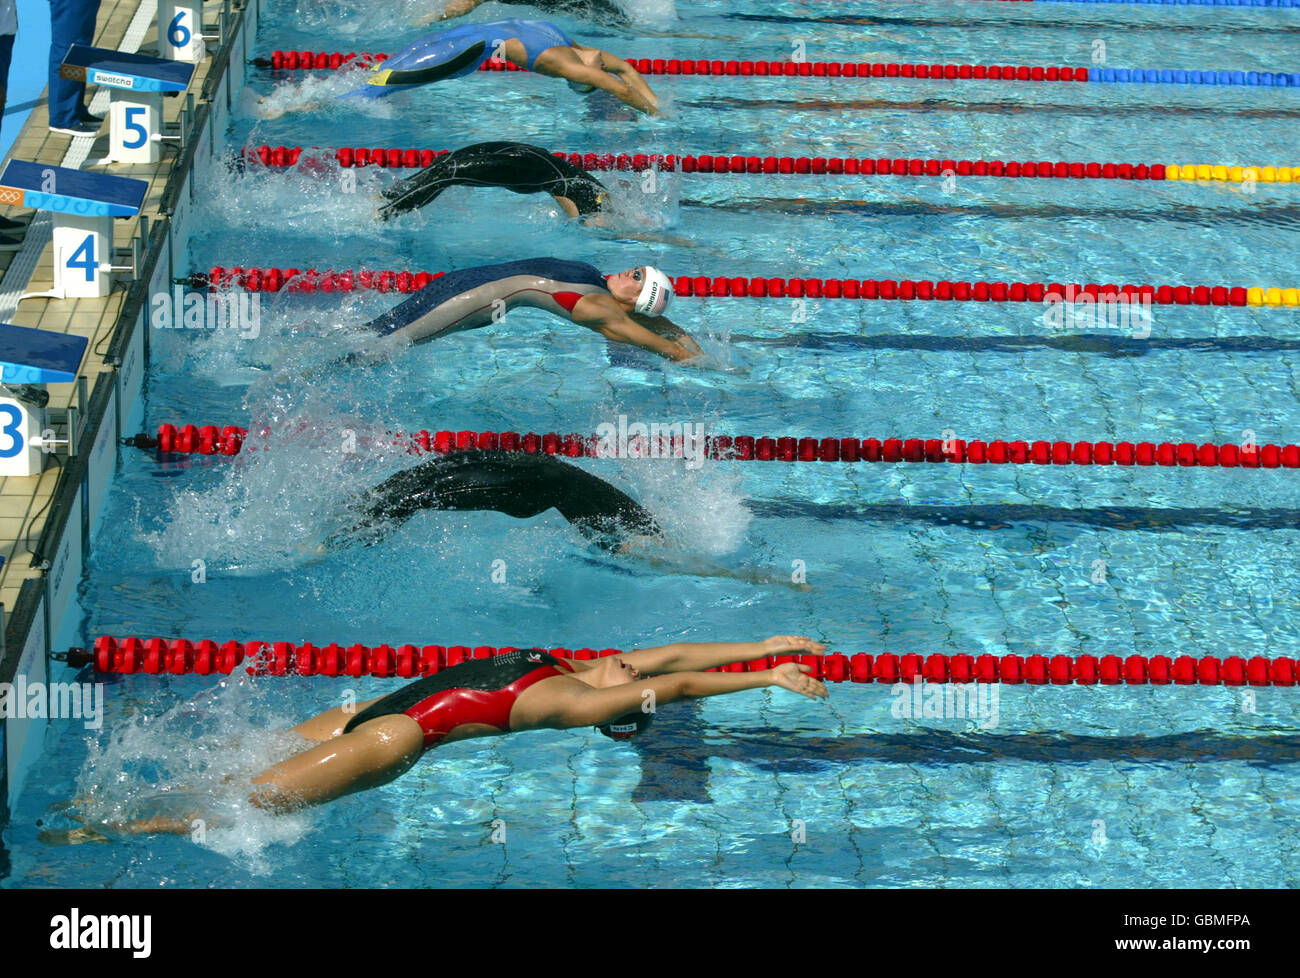 Swimming - Athens Olympic Games 2004 - Women's 100m Backstroke - Heat Six. Natalie Coughlin, USA on her way to winning the Women's 100m Backstroke Stock Photo